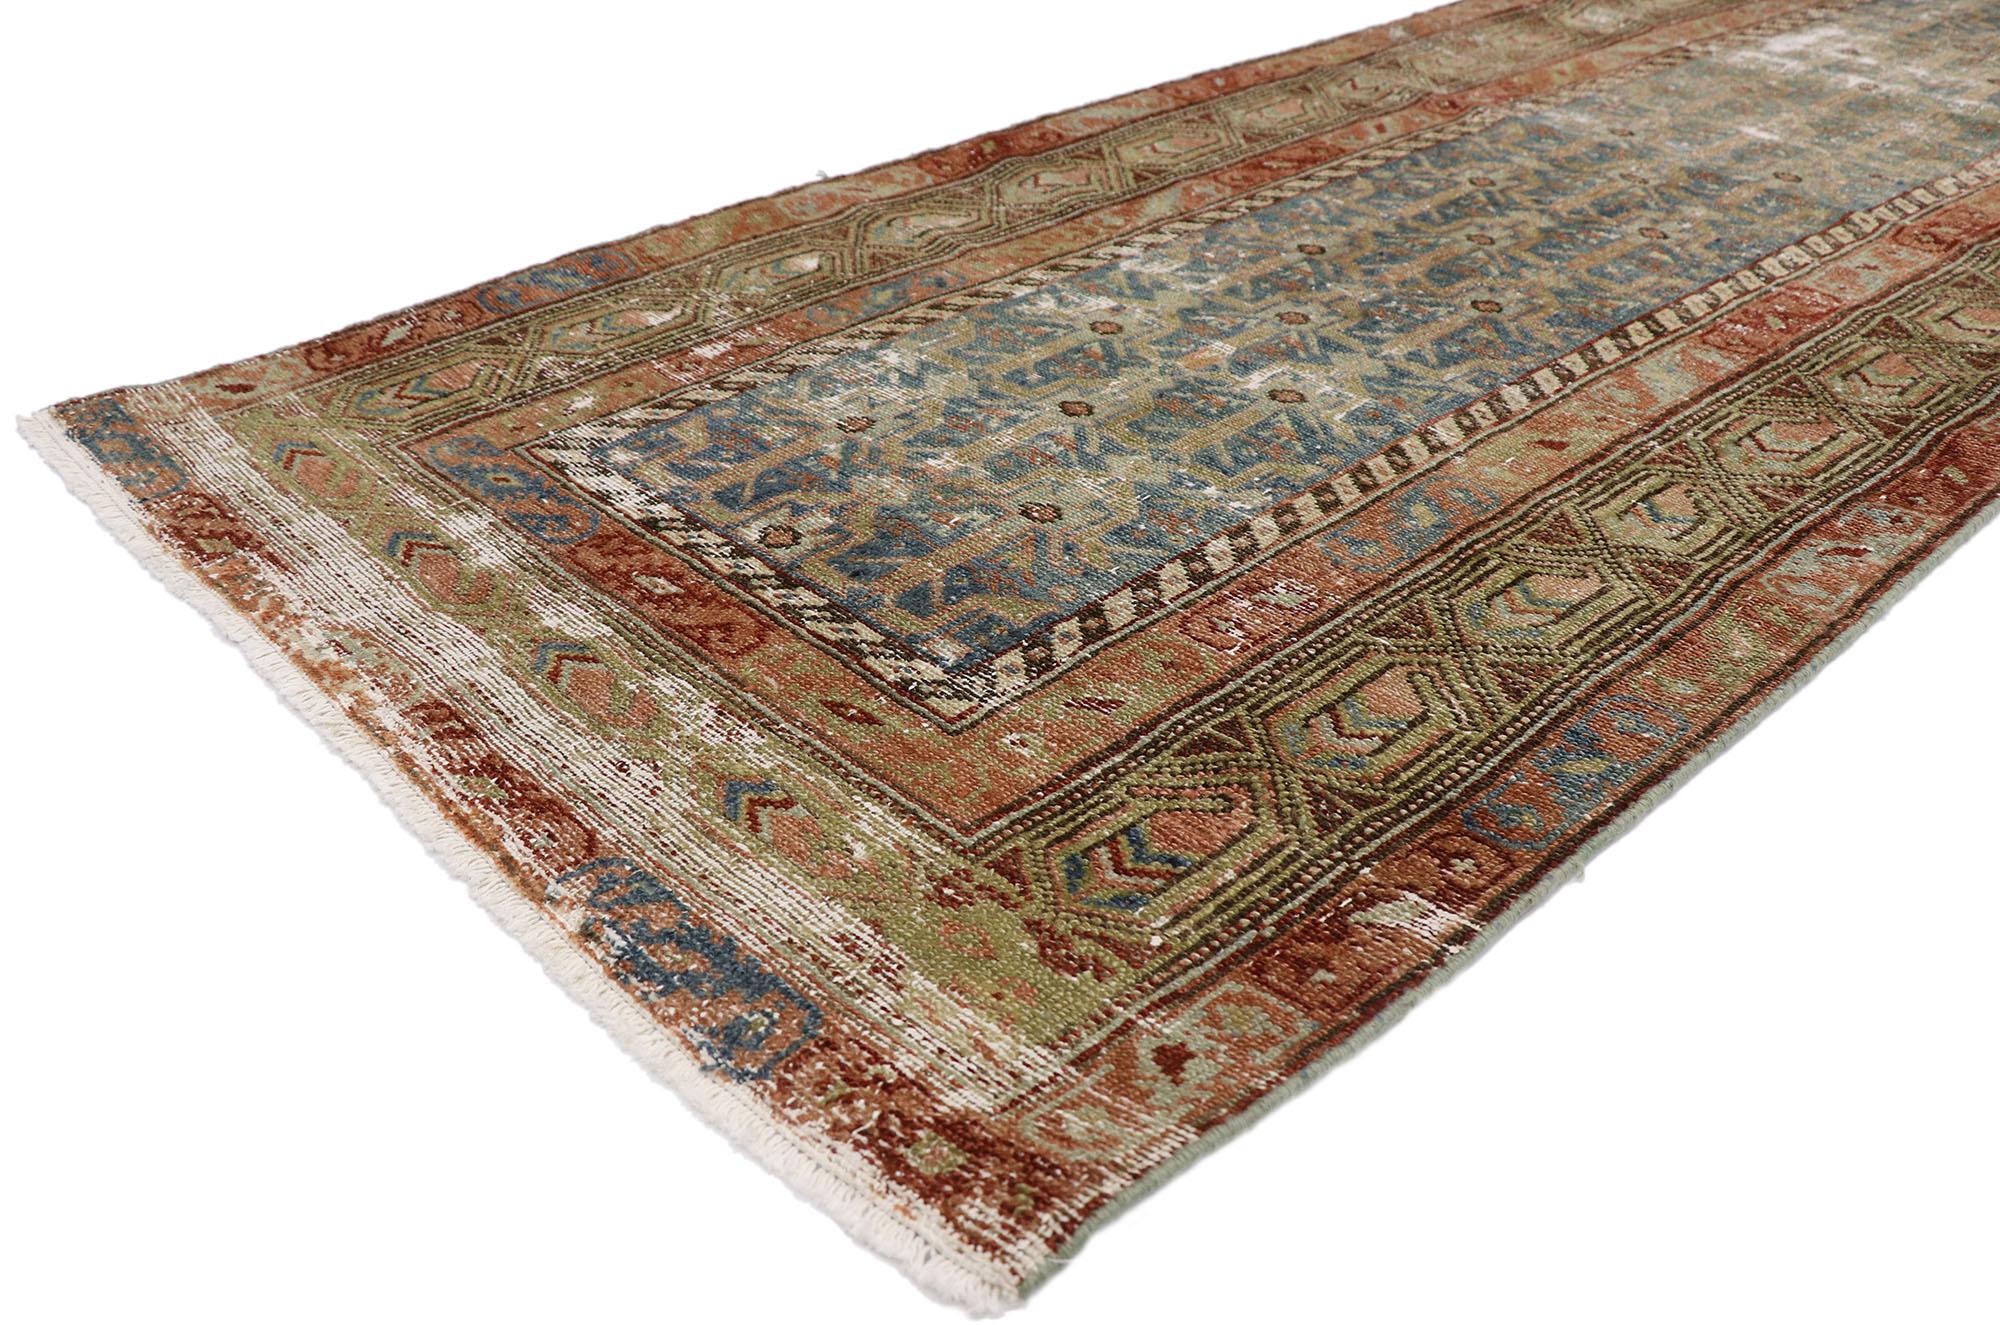 60934 Distressed Antique Persian Malayer Runner with Rustic Style 03'04 x 11'06. Cleverly composed and poised to impress with its rustic sensibility, this hand knotted wool distressed antique Persian Malayer runner will take on a curated lived-in